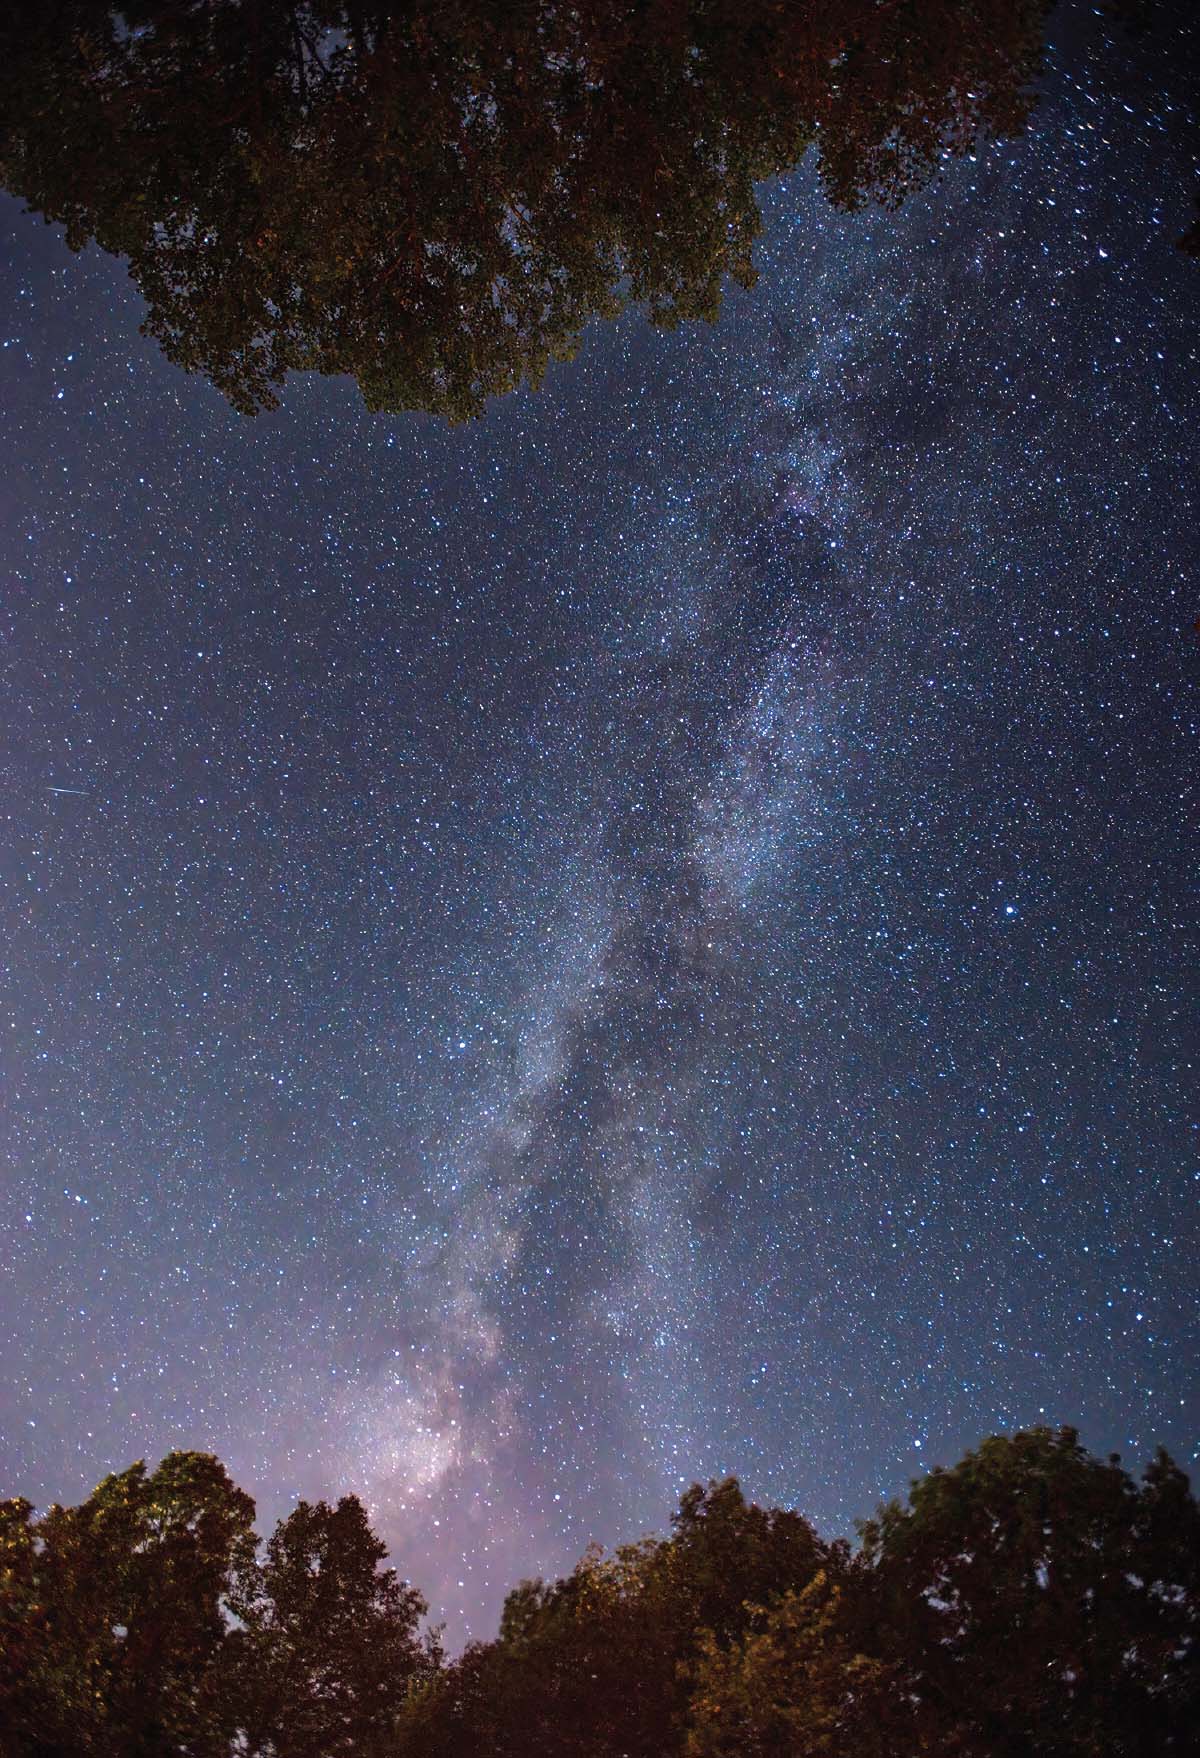 Photo taken by Nick Chill of the full night sky with a light show of stars